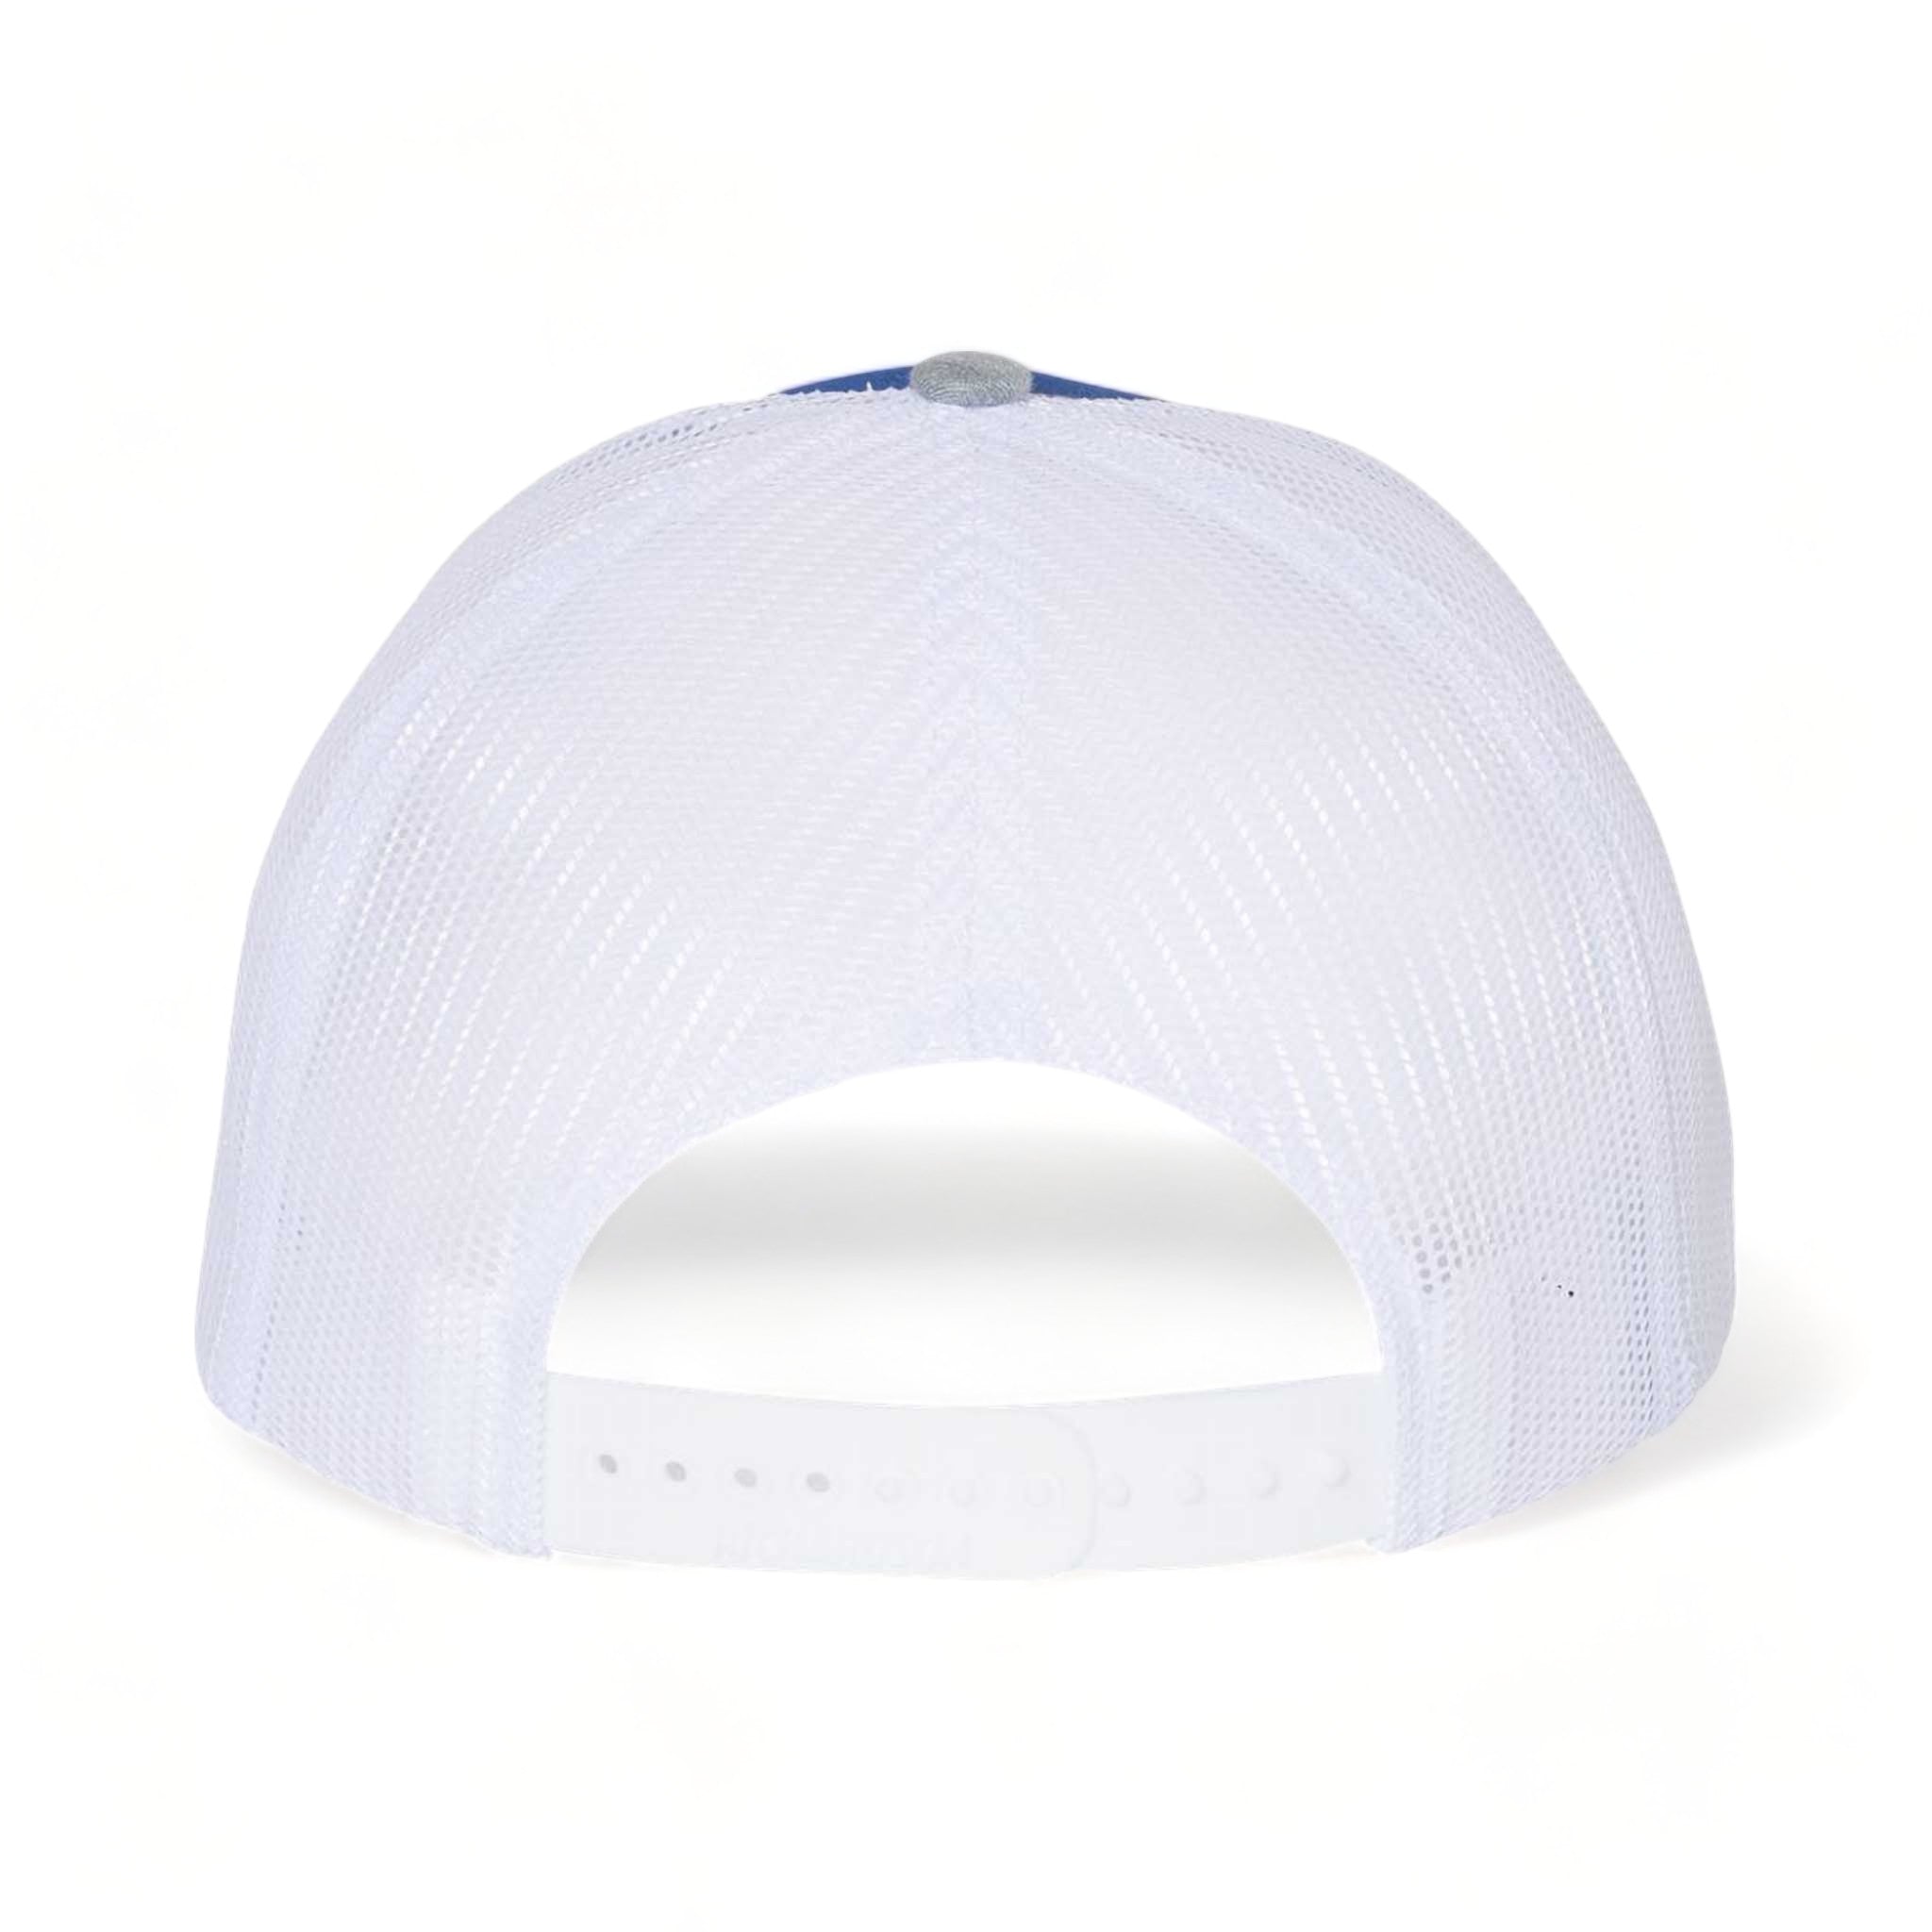 Back view of Richardson 112 custom hat in royal, white and heather grey